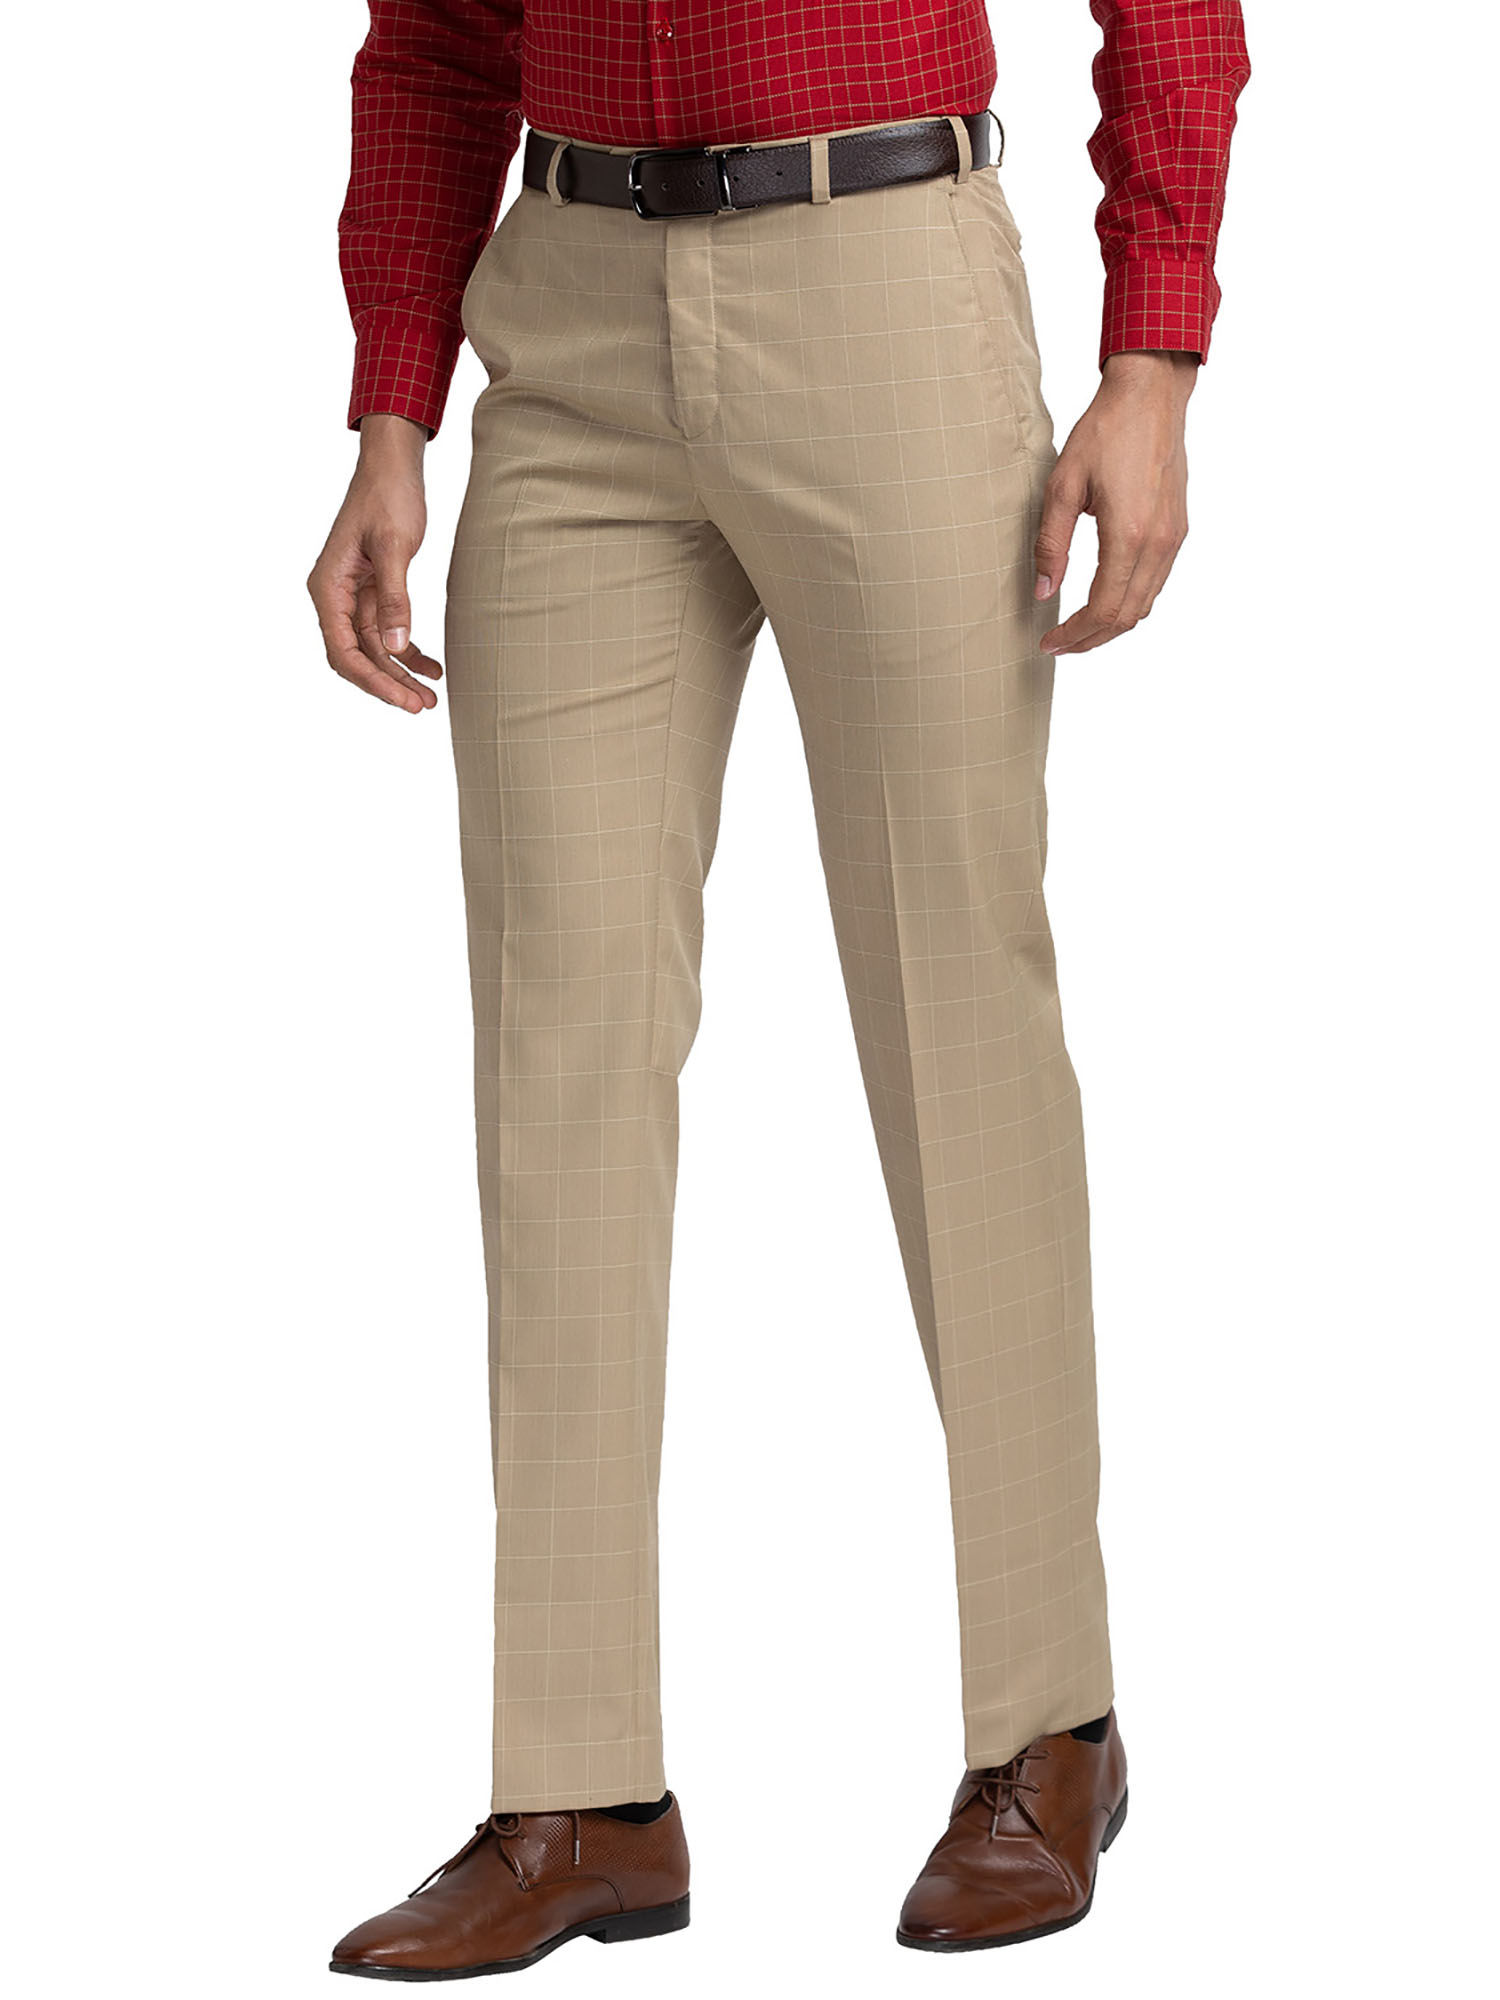 Contemporary Mens Fashion Beige Classic Trousers and White Shirt Ensemble |  MUSE AI